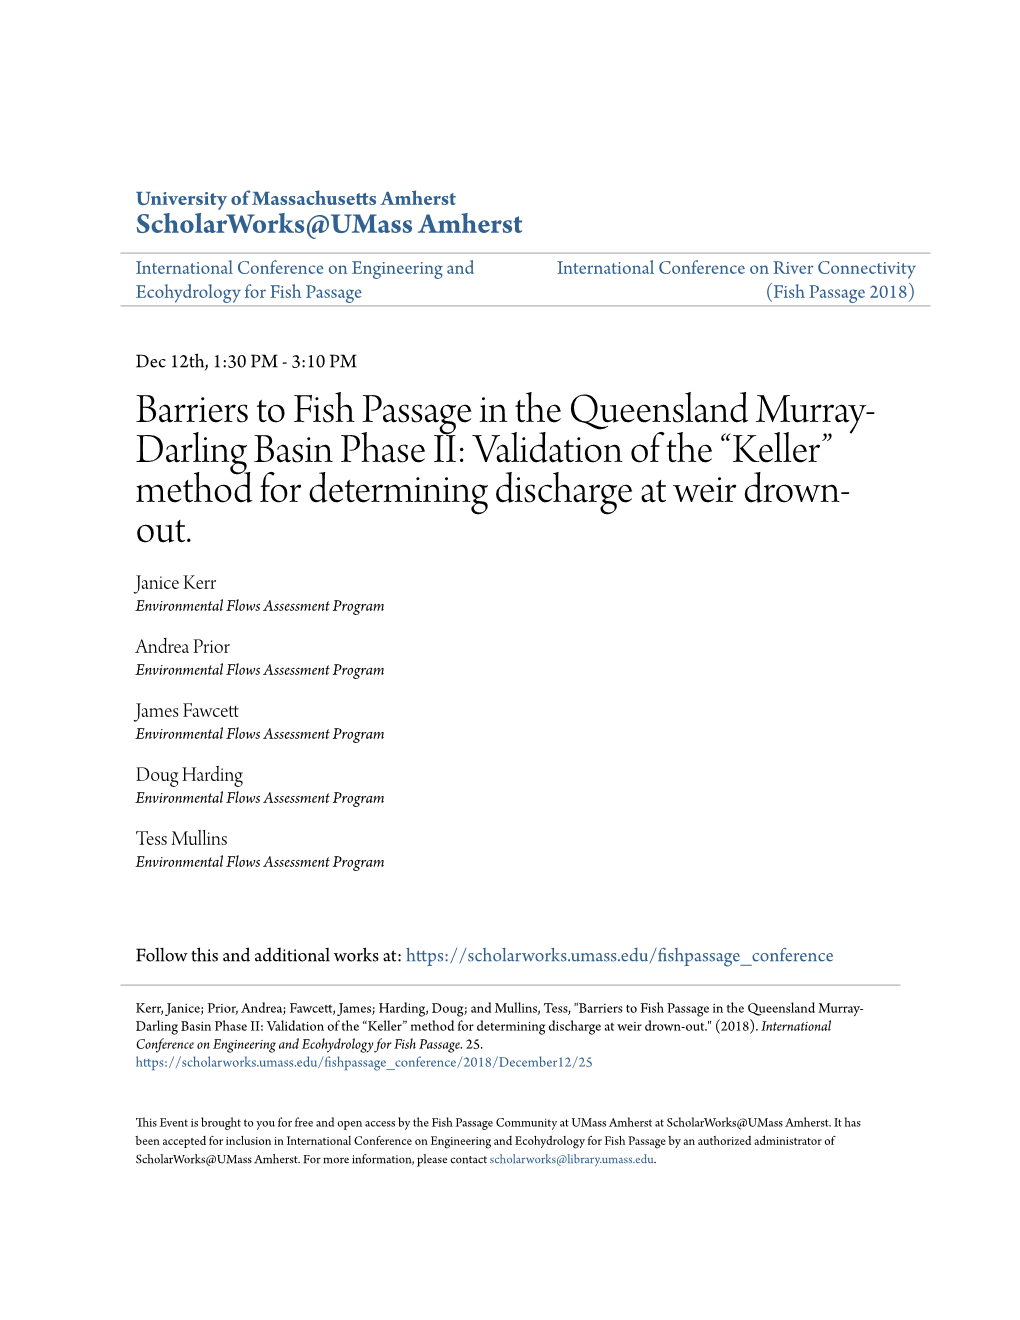 Barriers to Fish Passage in the Queensland Murray-Darling Basin